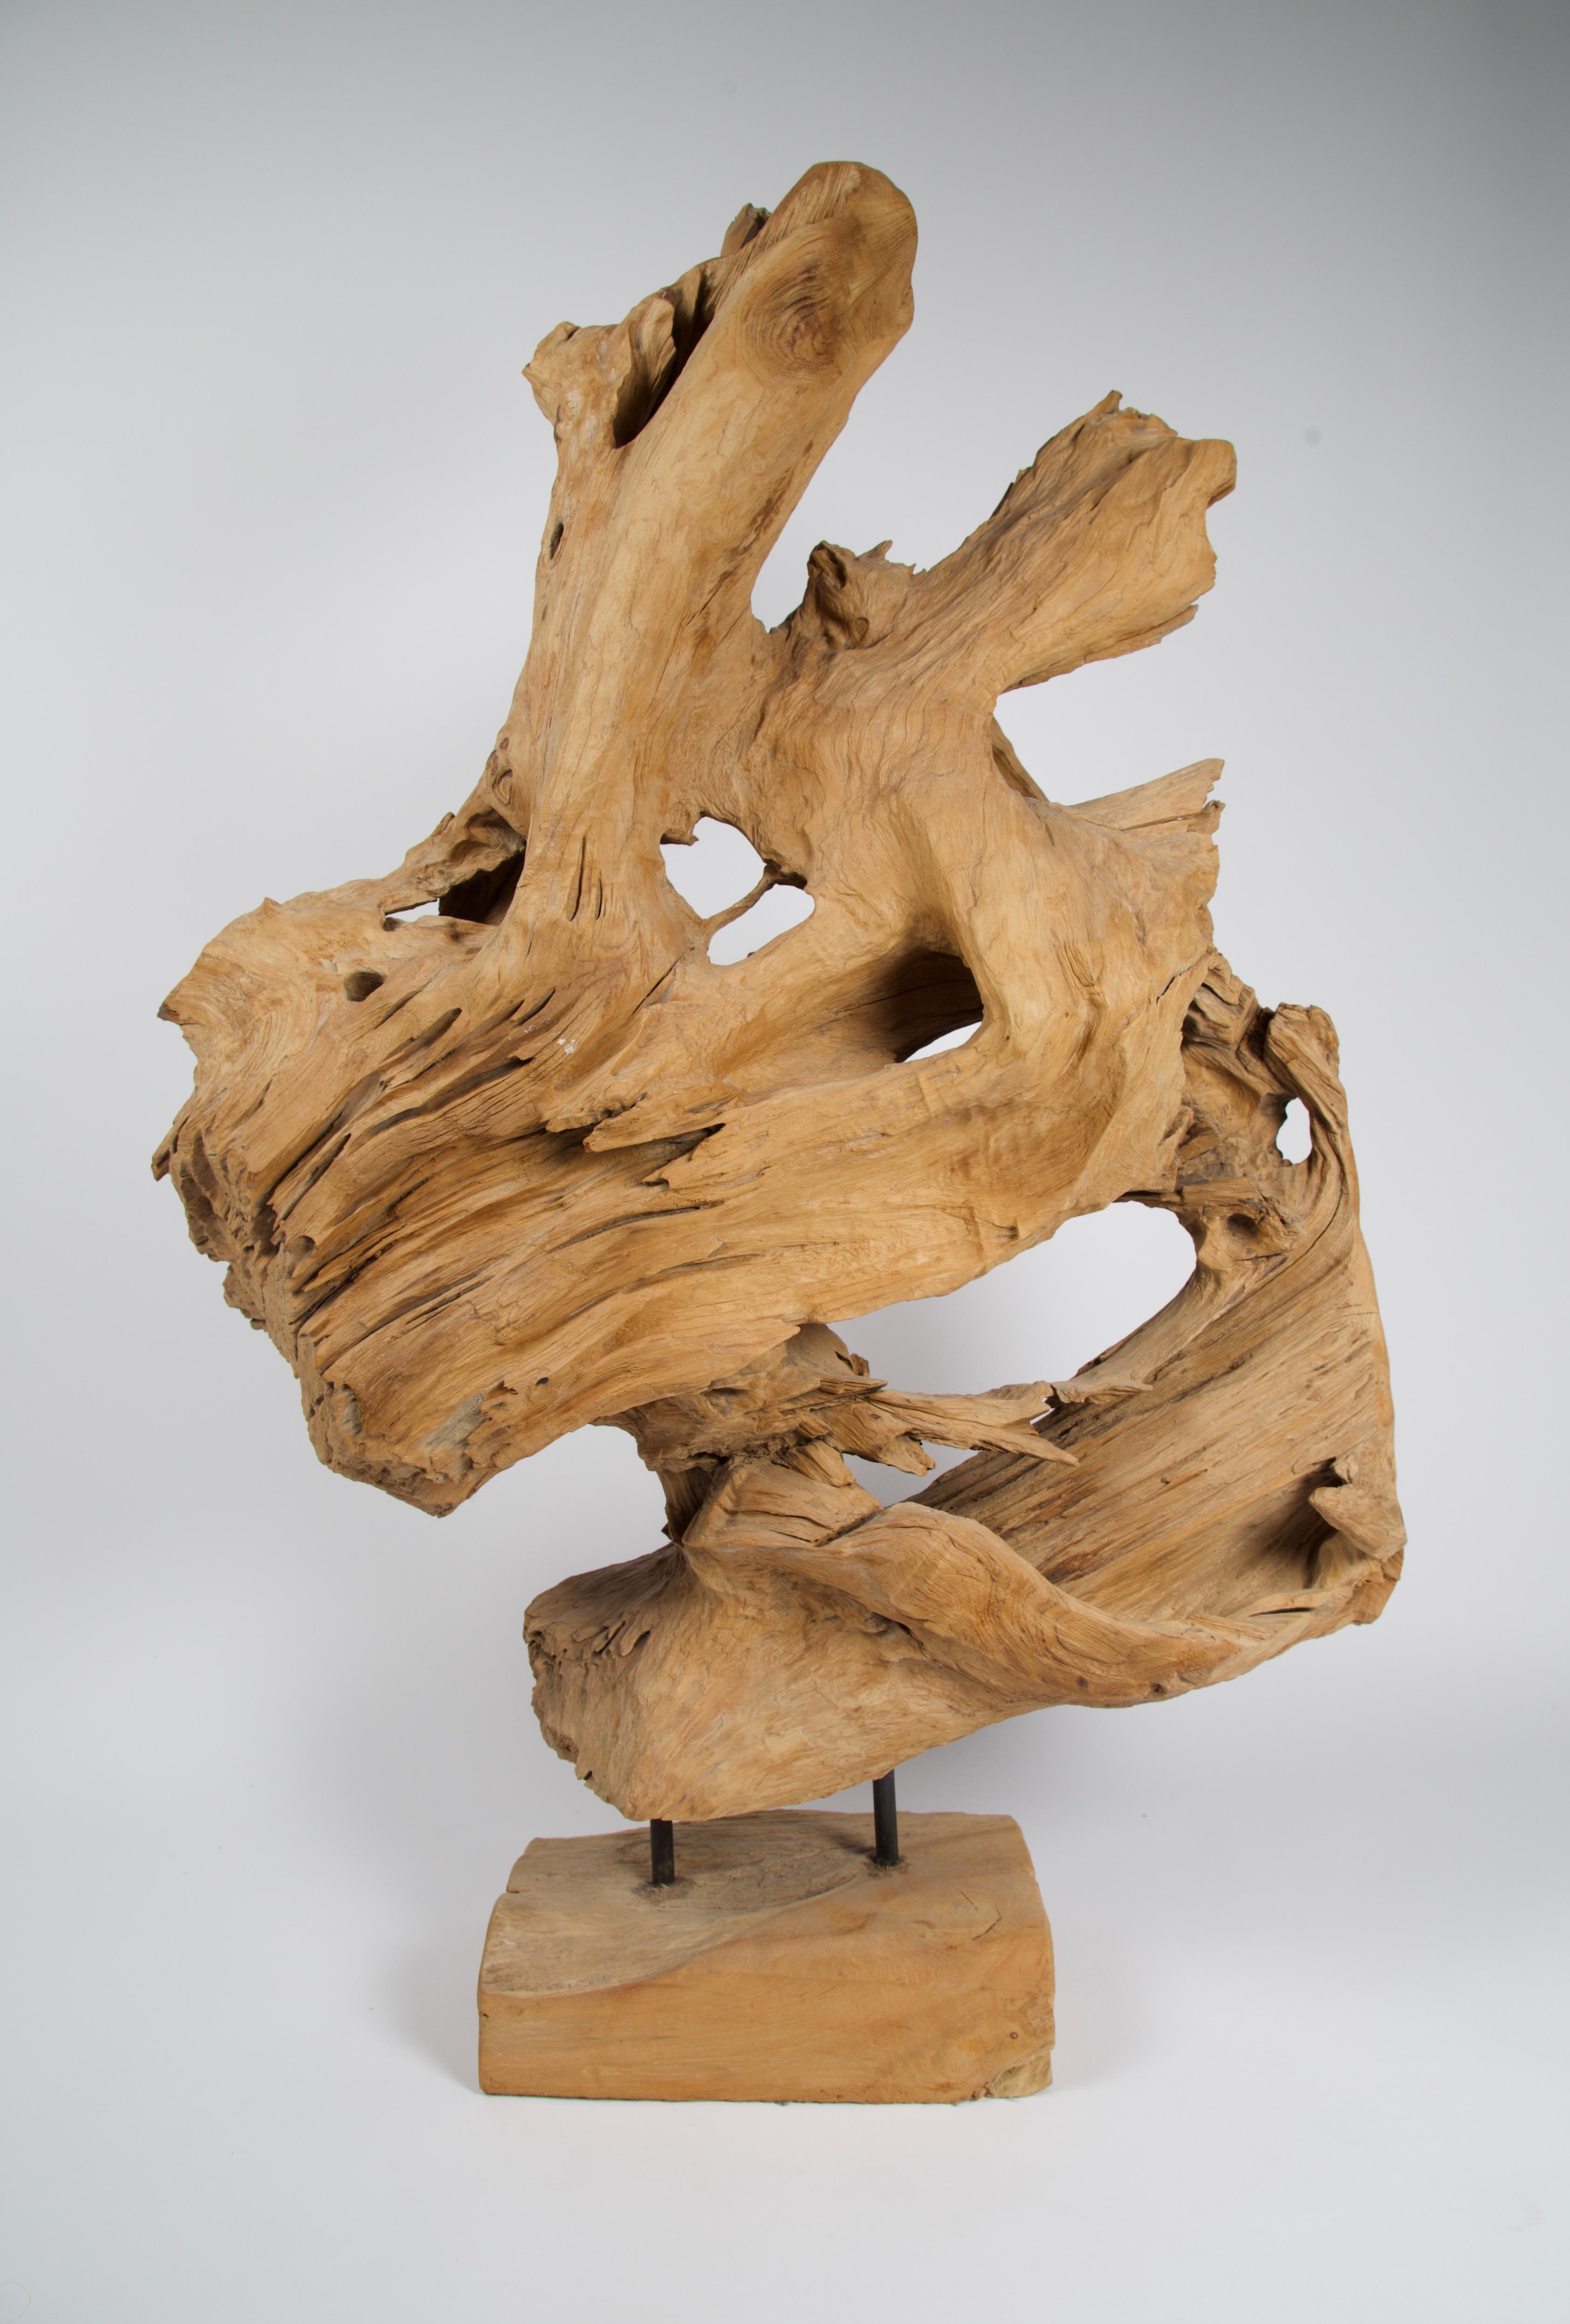 This is an amazing abstract freeform natural organic teak wood sculpture. A very impressive and large piece of art. Mounted to a wood base.